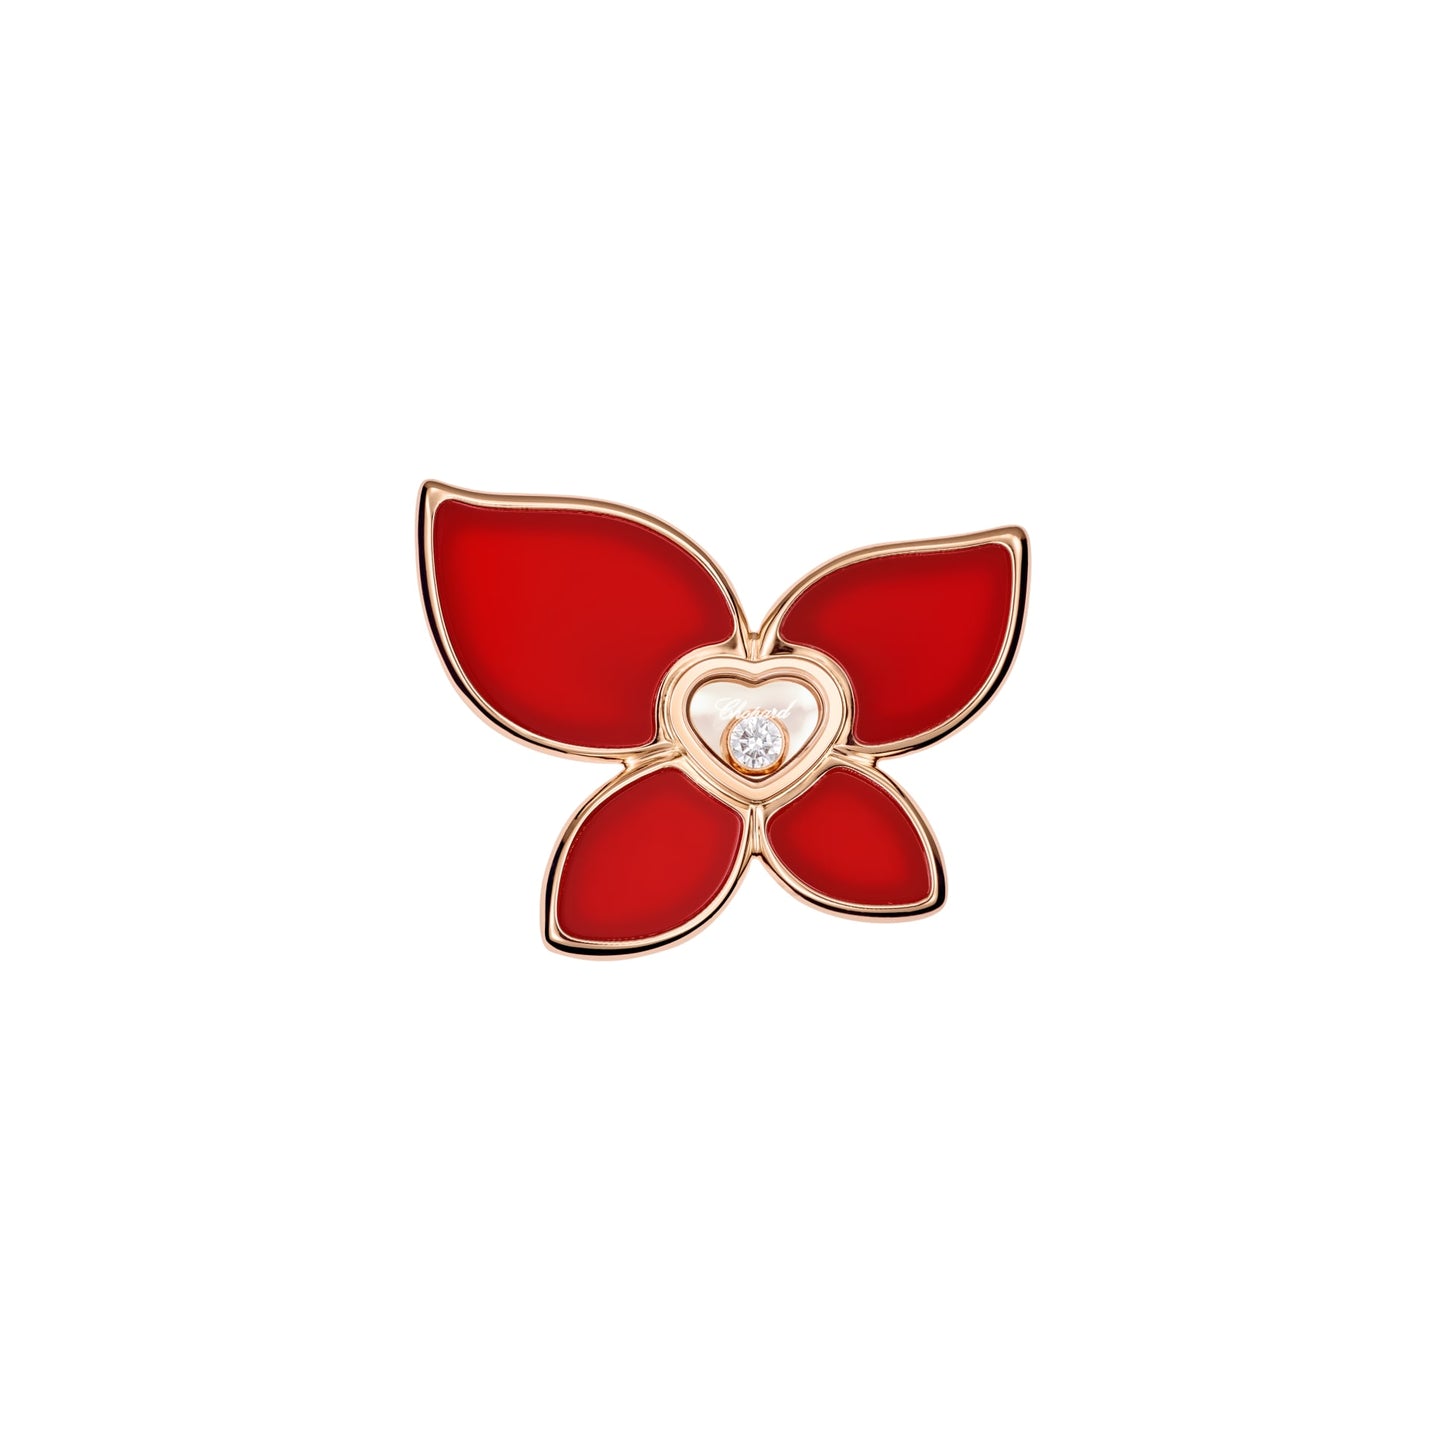 HAPPY BUTTERFLY X MARIAH CAREY RING, ETHICAL ROSE GOLD, DIAMOND, CARNELIAN 828599-5010